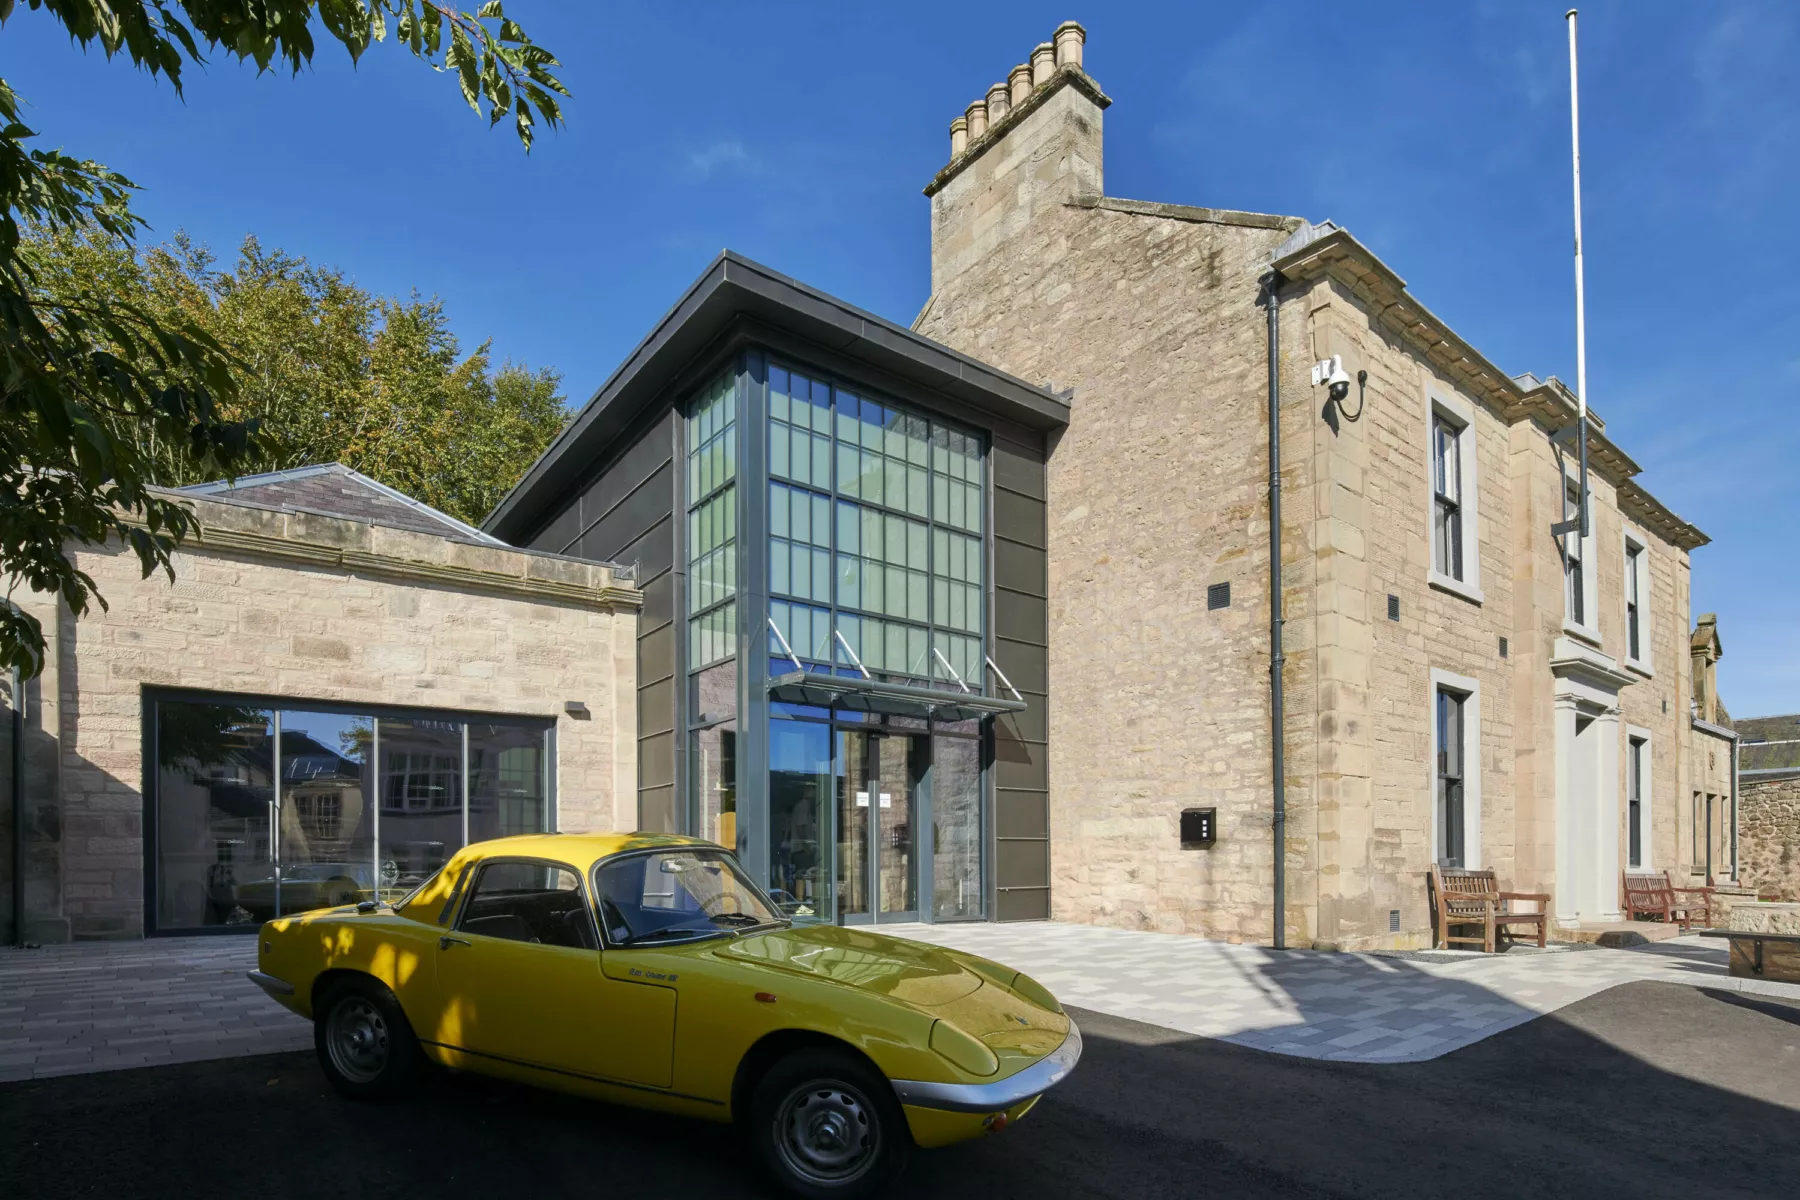 Exterior view of the Jim Clark Motorsport Museum at Duns in the Scottish Borders. The museum is made up of several historic buildings including a sandstone, Georgian detached house and several outbuildings. The garage has been linked to the house with a contemporary structure clad in dark grey. Outside a yellow, Lotus Elan S3 Coupe vintage sports car is parked in the driveway.